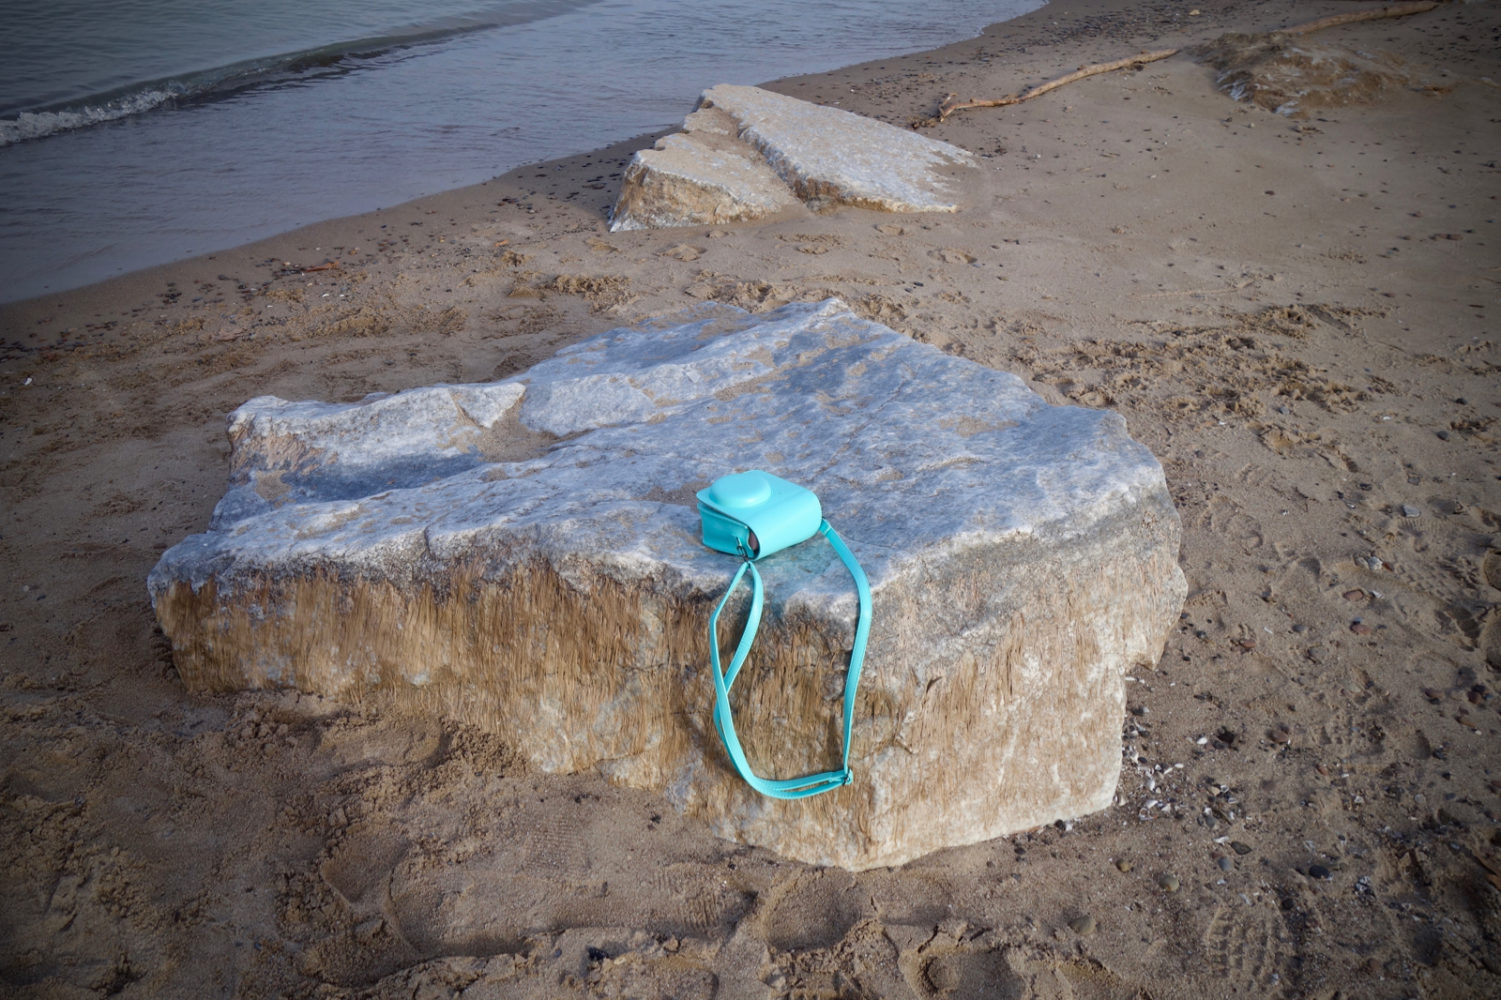 Turquoise camera case on Durand Eastman beach